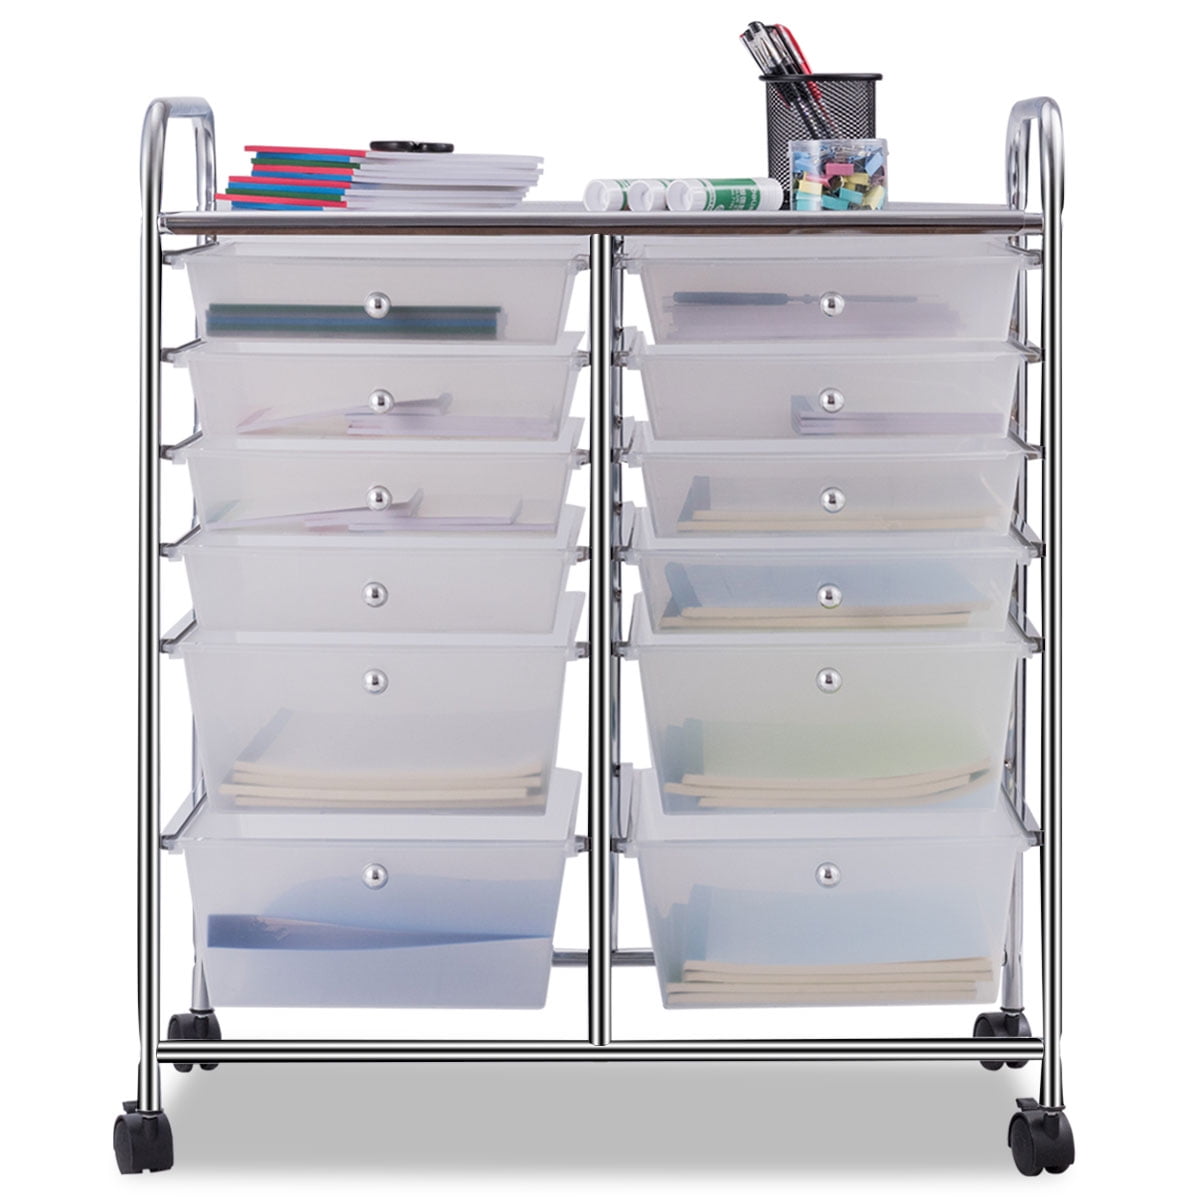 Mobile Organizer, 20 Drawers, 25 x 38 x 15-1/4 Inches, Multiple 